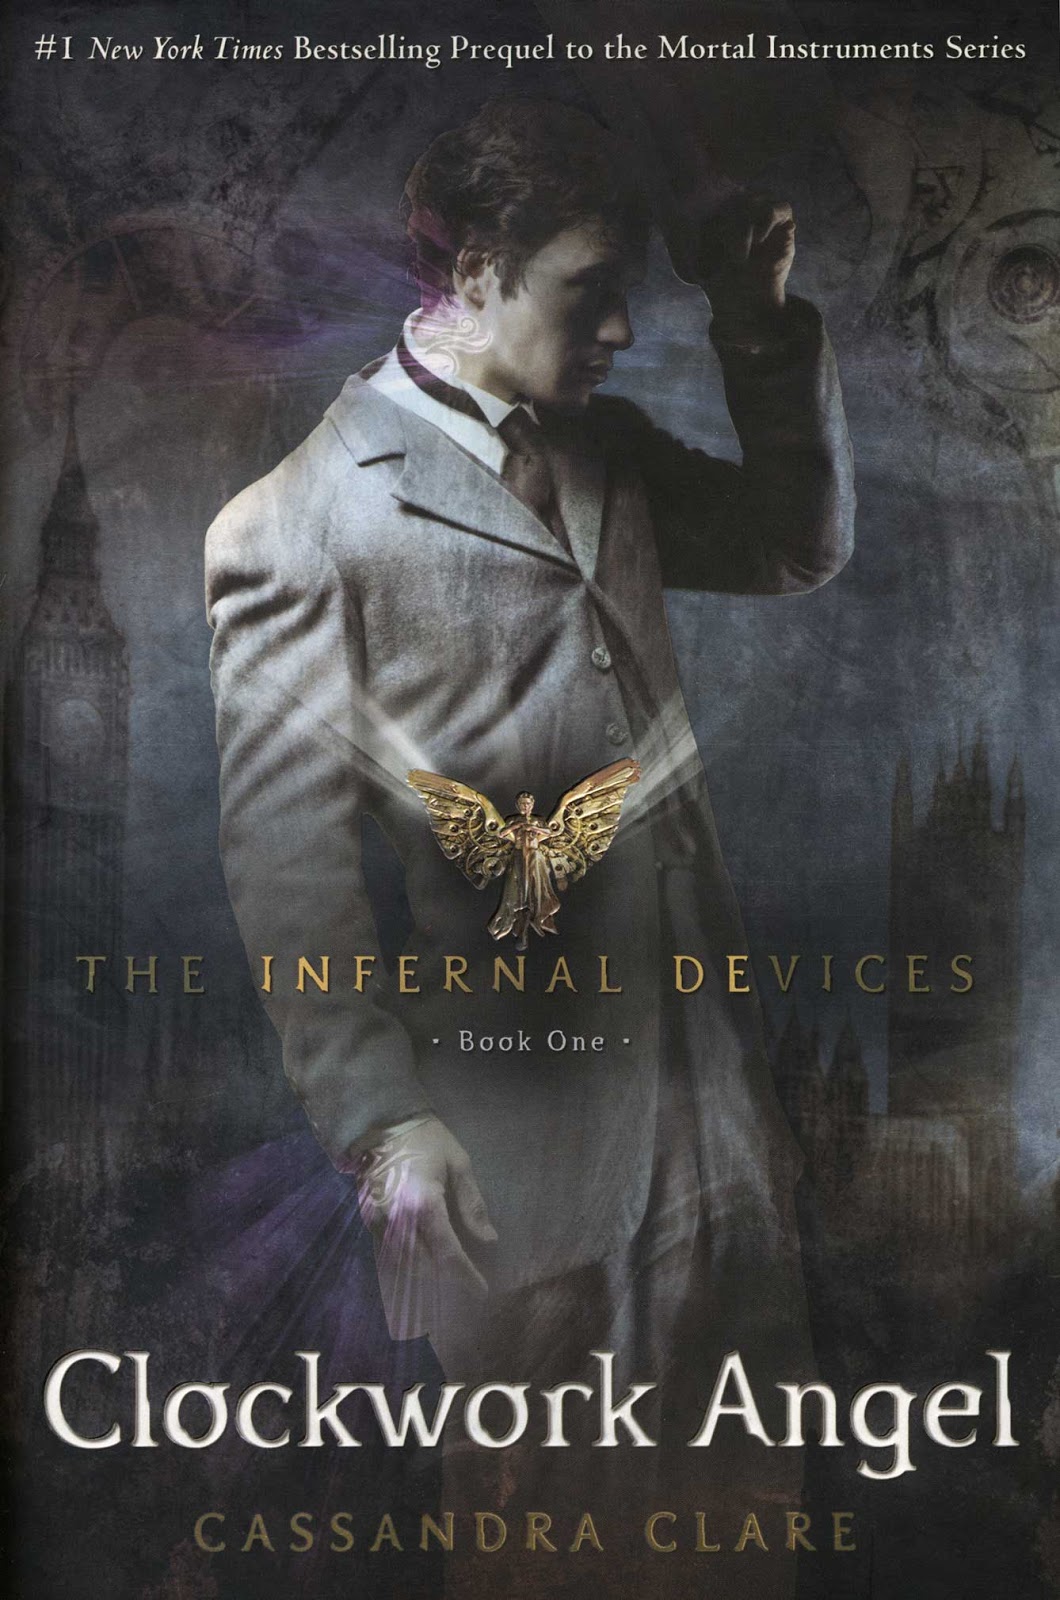 'Clockwork Angel' cover art from the 'Infernal Devices' trilogy